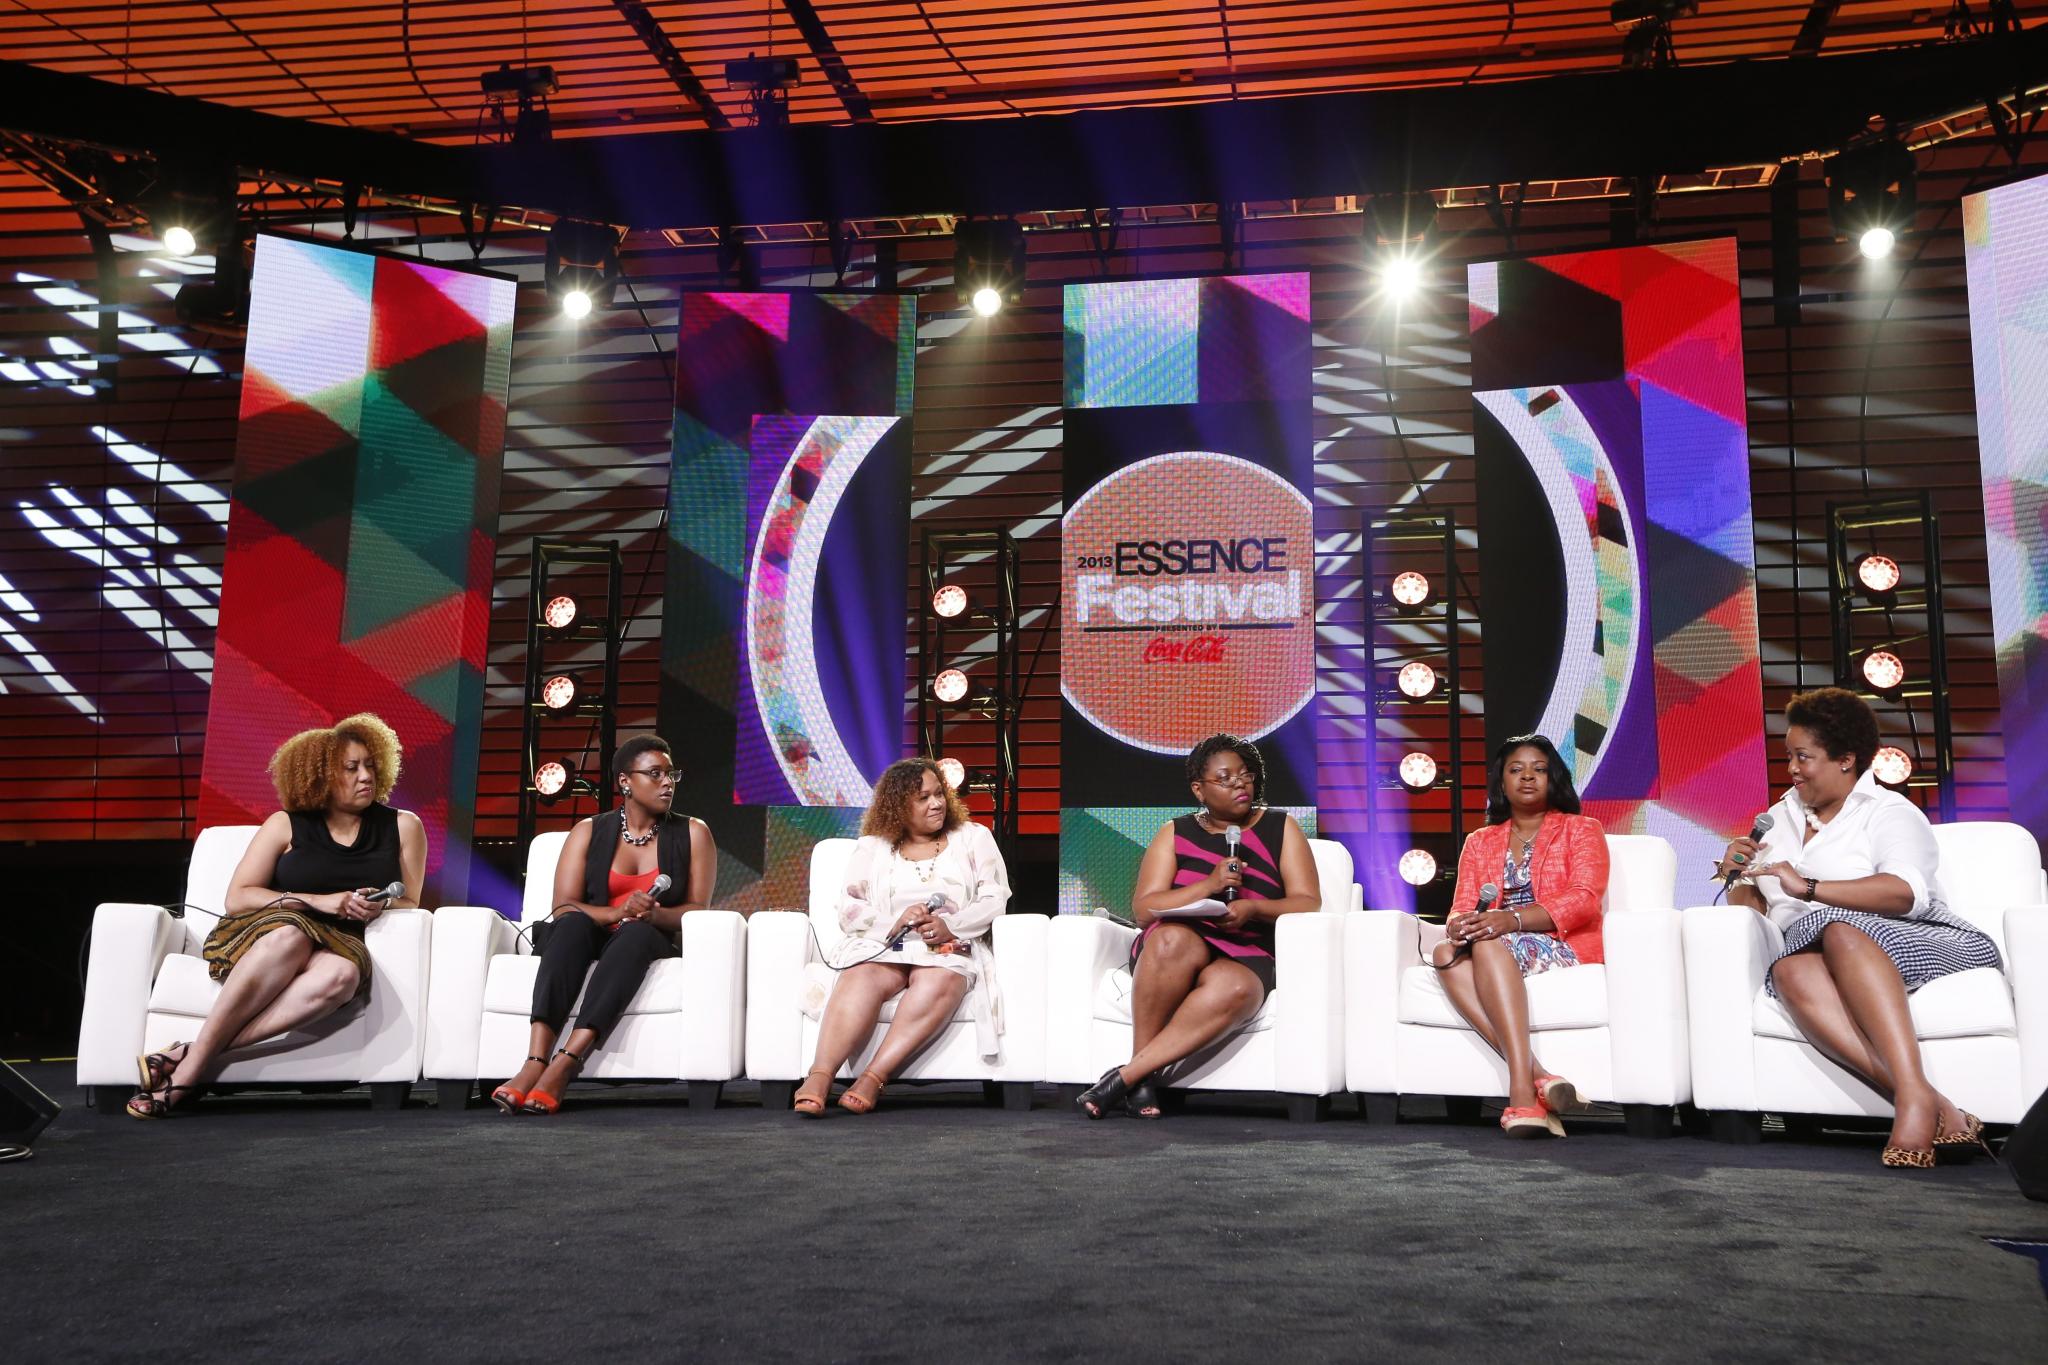 Career Pointers from Day 2 of ESSENCE Fest